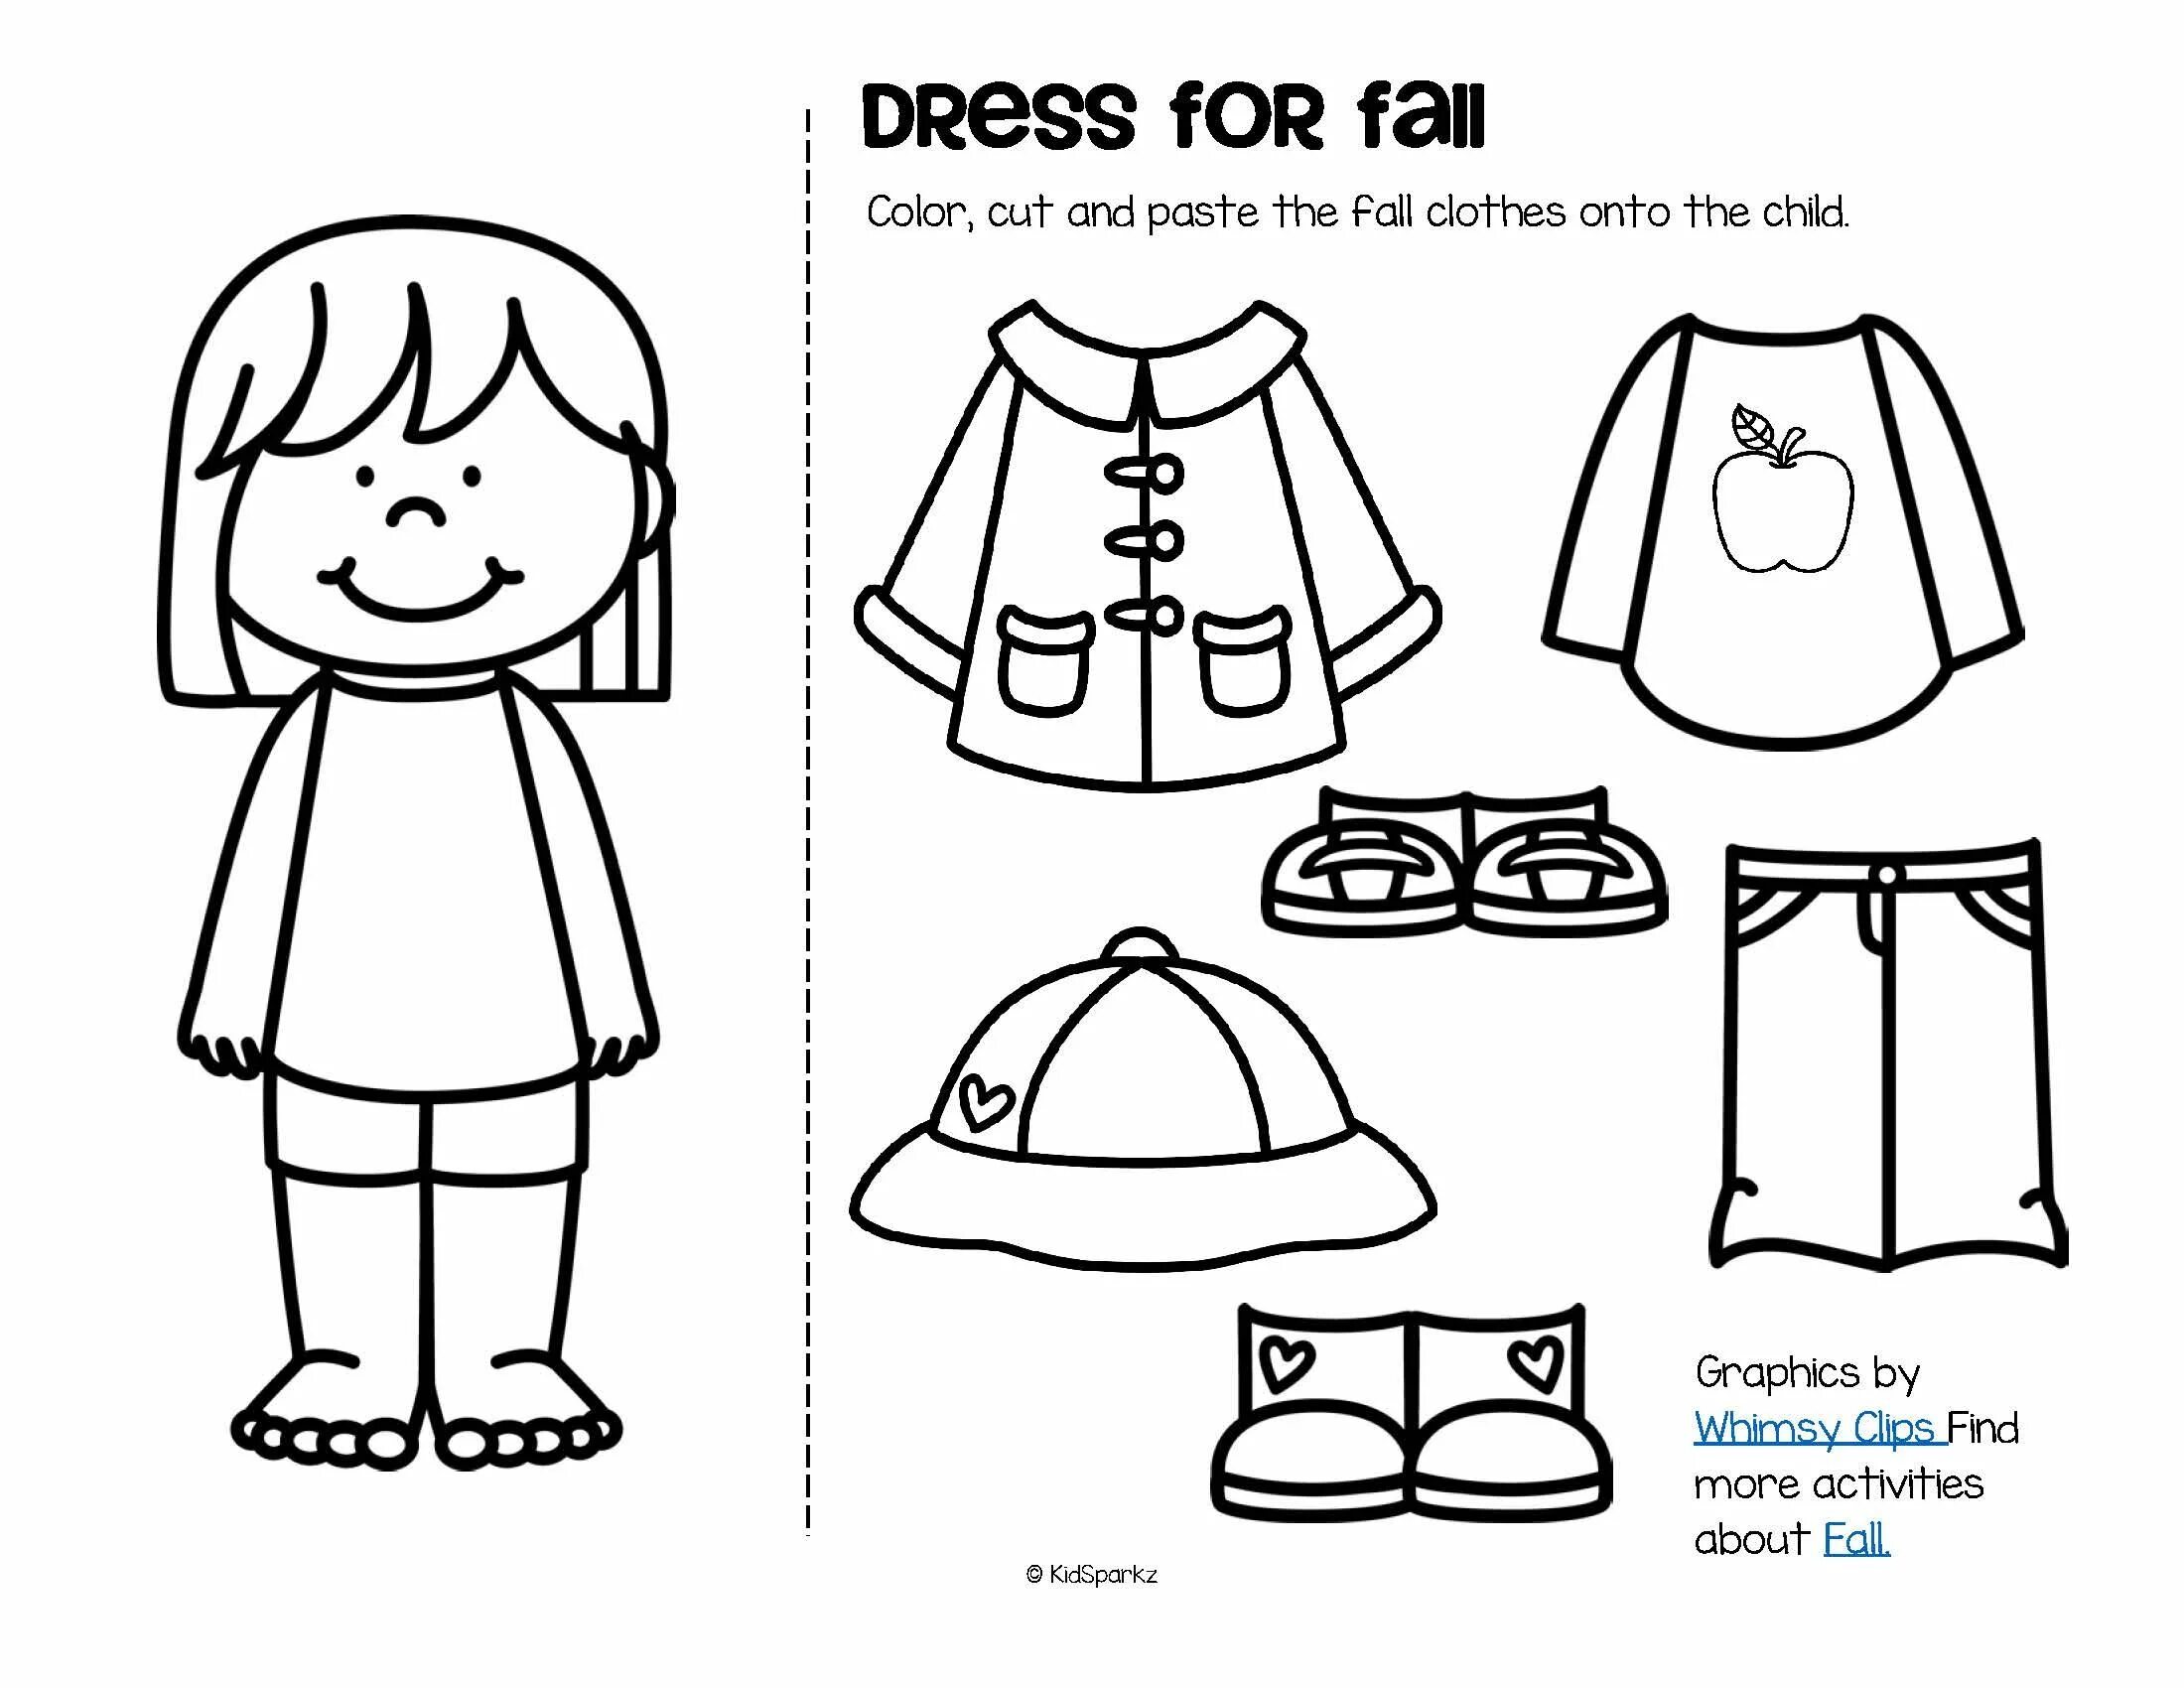 Clothes worksheets for kids. Summer clothes and Winter clothes раскраска. Clothes Worksheets аппликация. Summer and Winter clothes для раскраска. Dress for Winter Worksheets for Kids.